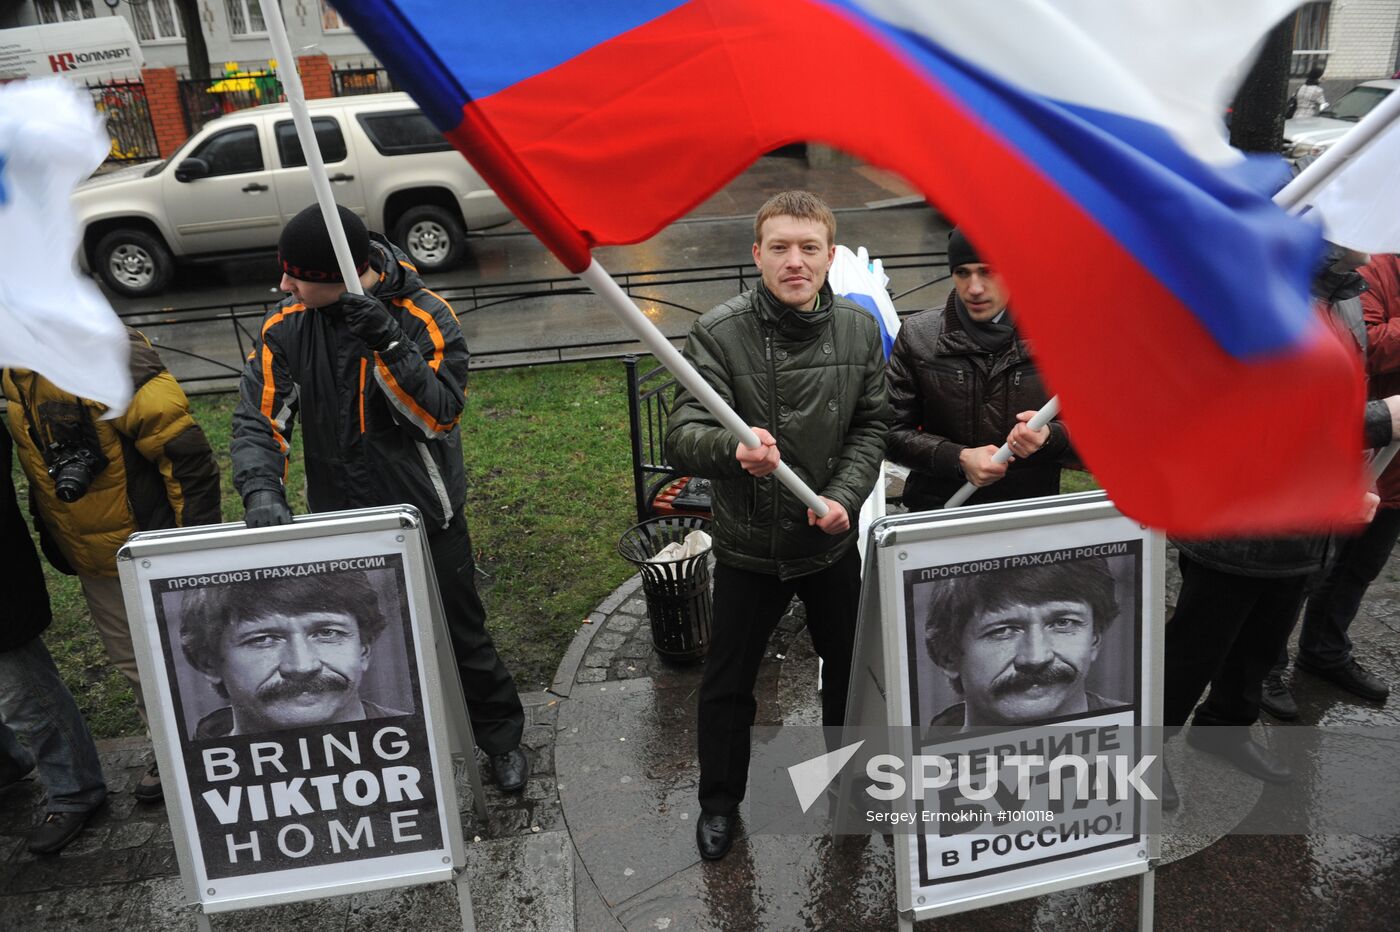 Picketing US consular office to return Viktor Bout home